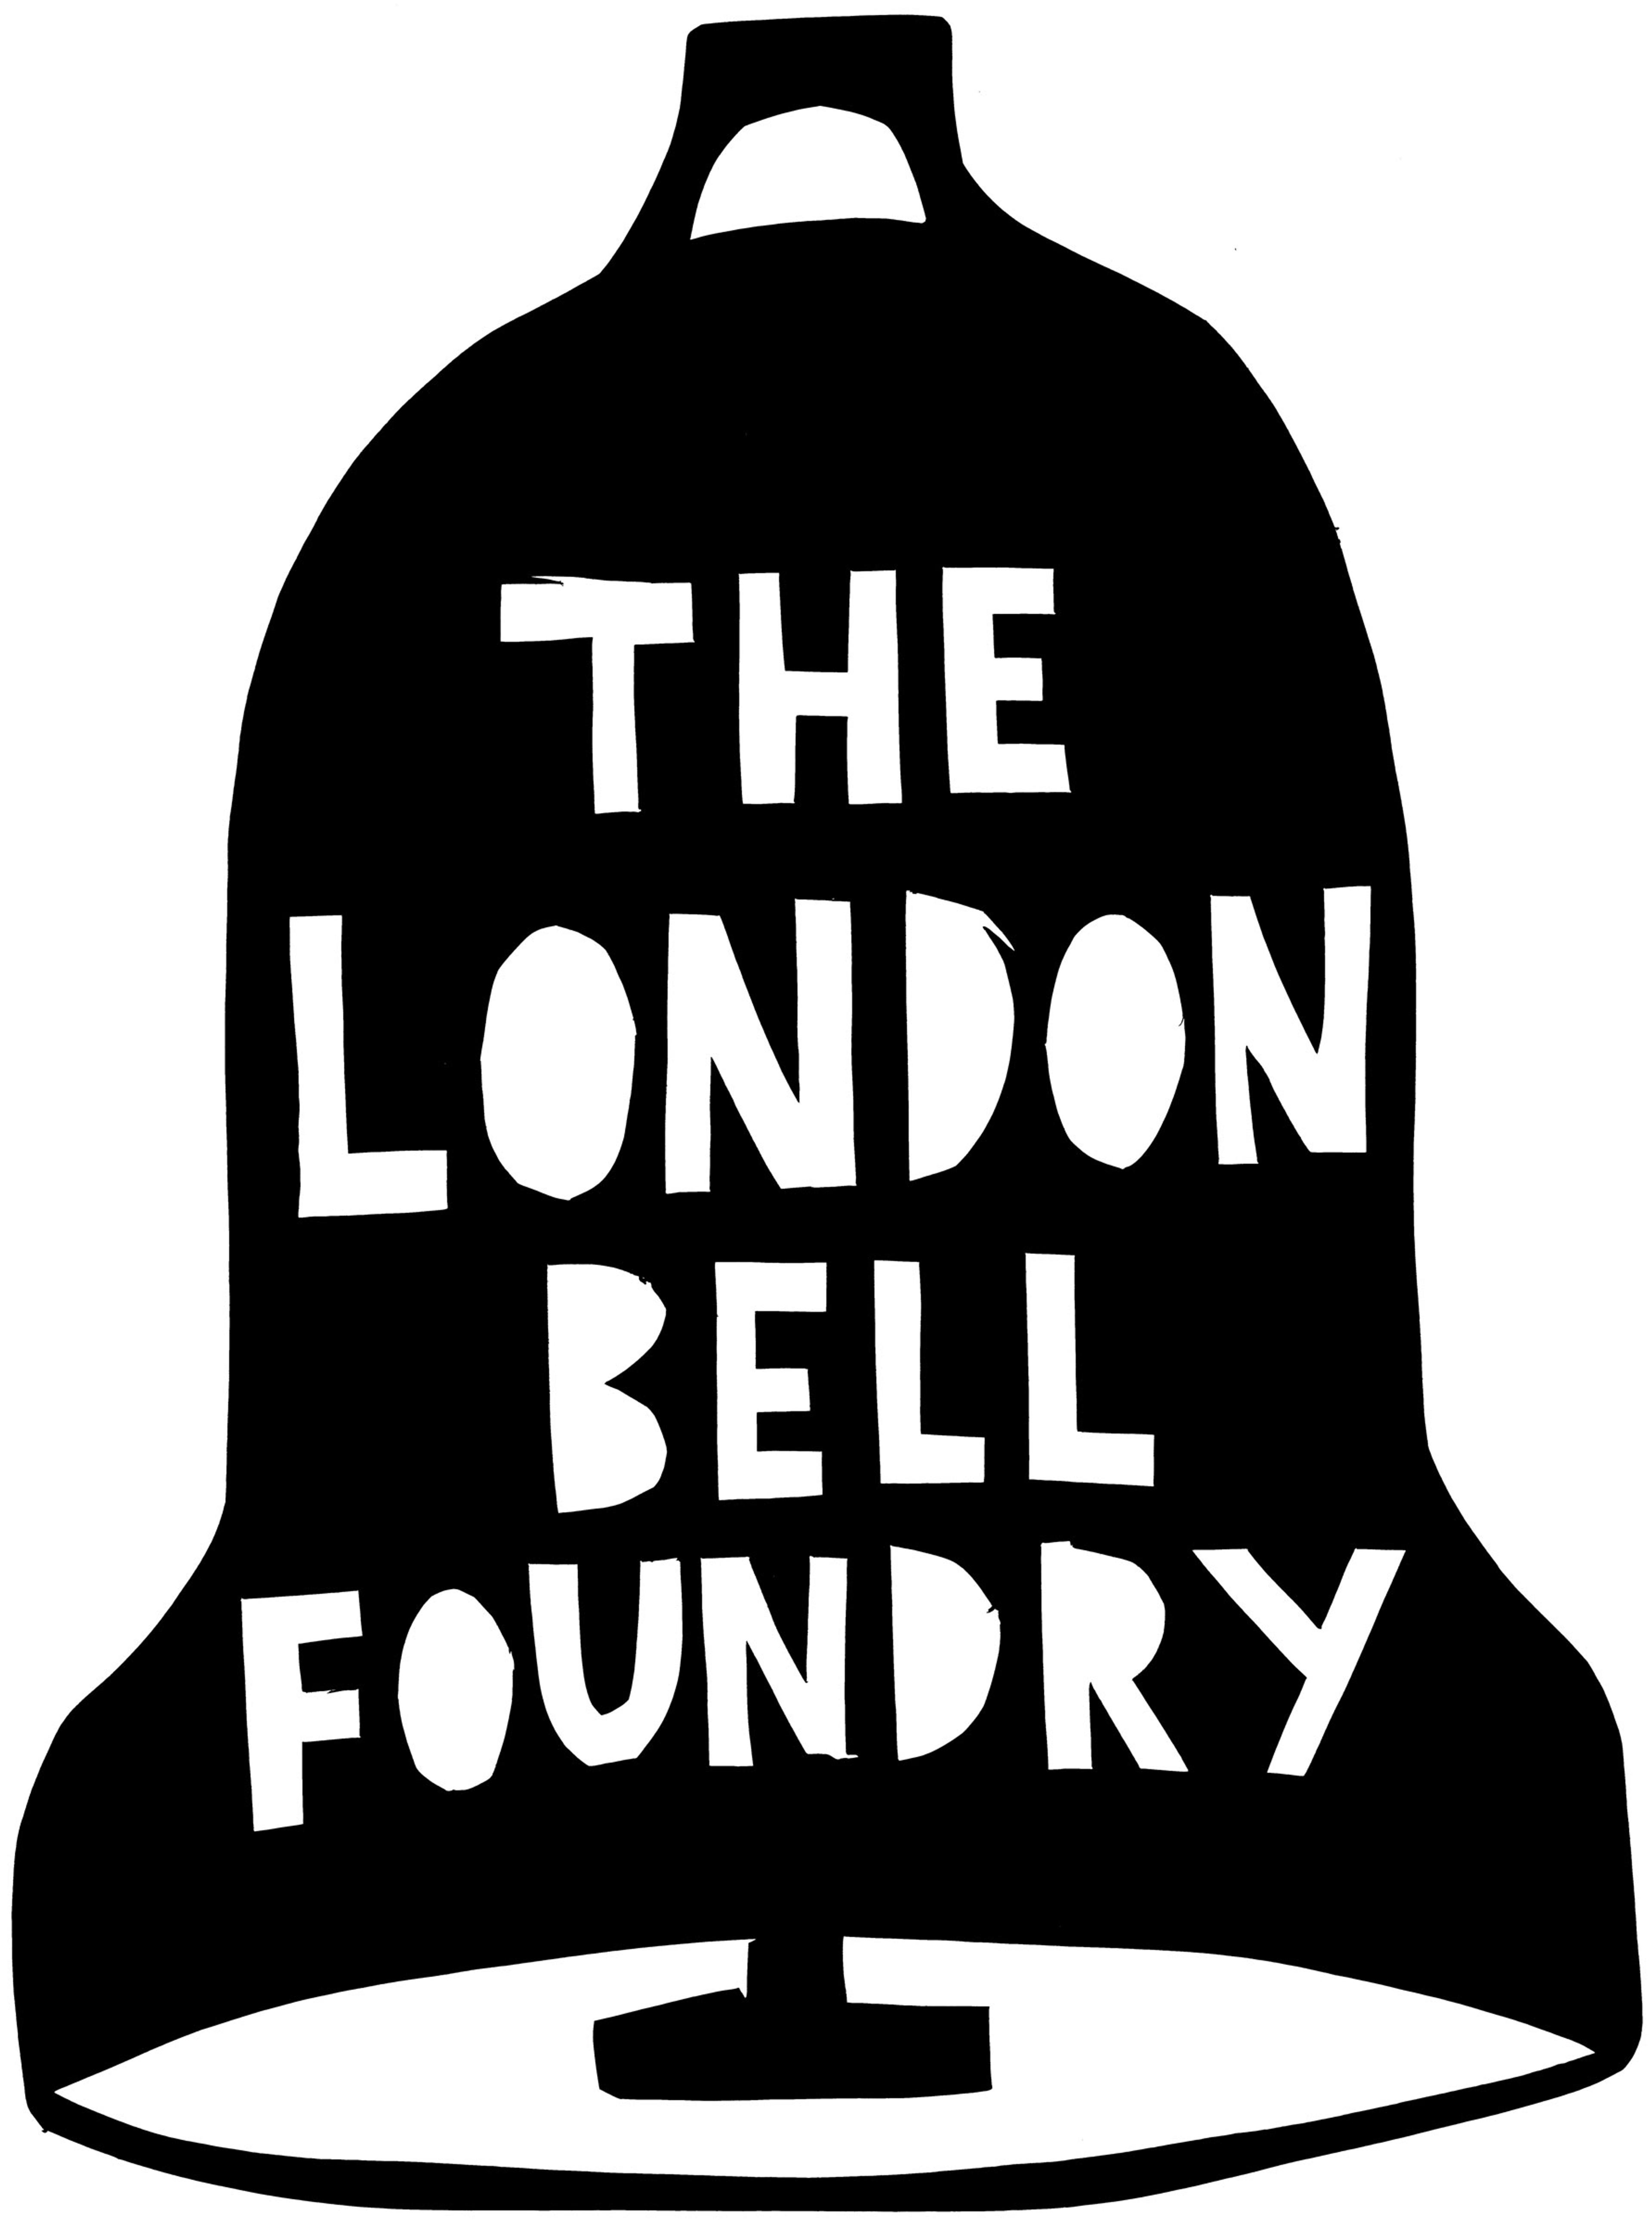 The London Bell Foundry logo